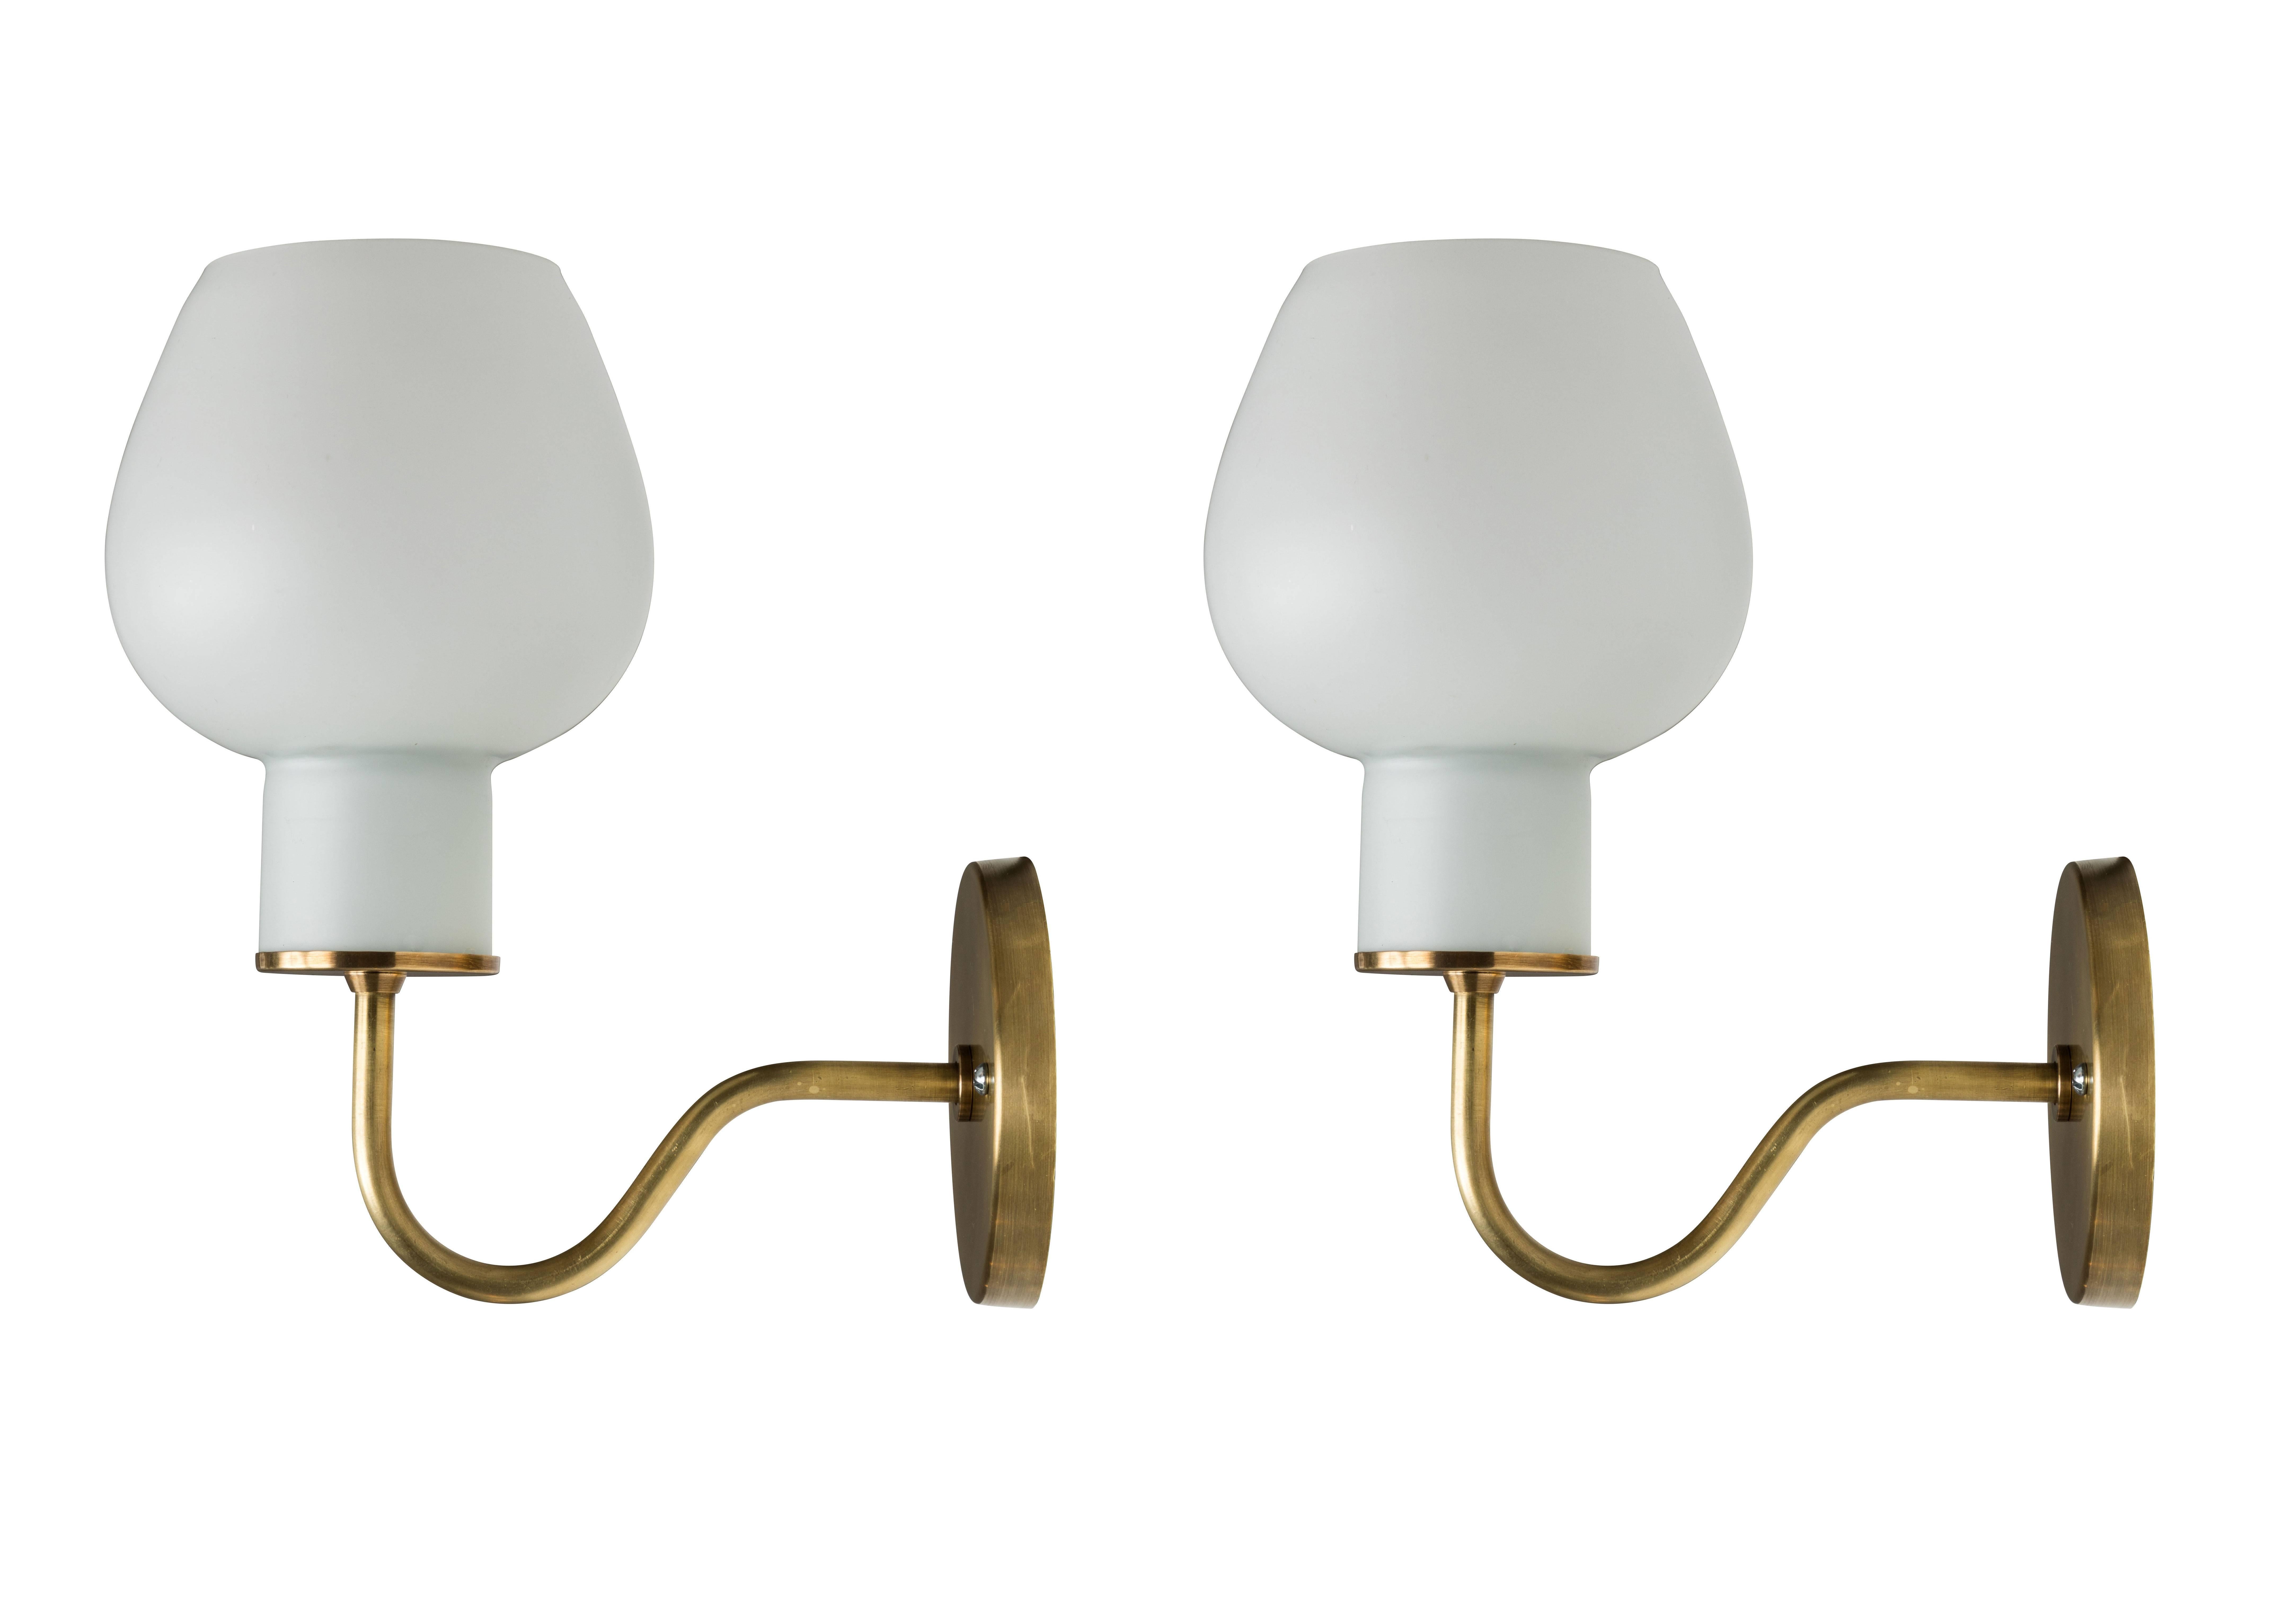 1950s Vilhelm Lauritzen 'Christiansborg' sconces for Louis Poulsen. Executed in opaline matte glass and brass. The Christiansborg offers gentle illumination via the opaline glass, which generate softer tones in the room, and is simply ideal for